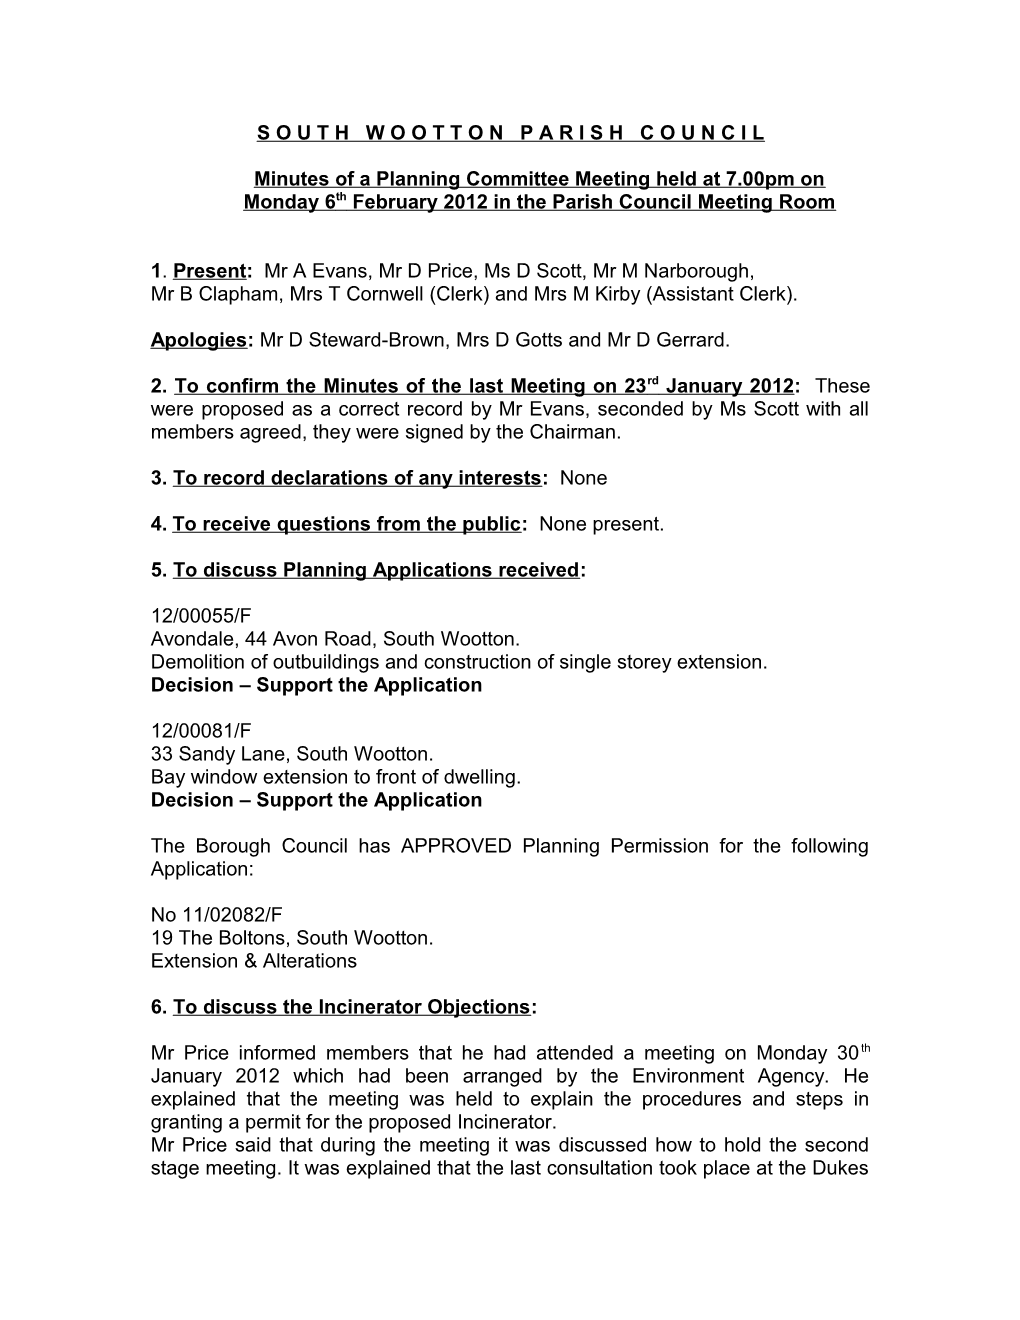 Minutes of a Planning Committee Meeting Held at 7.00Pm on Monday 6Th February2012 in The